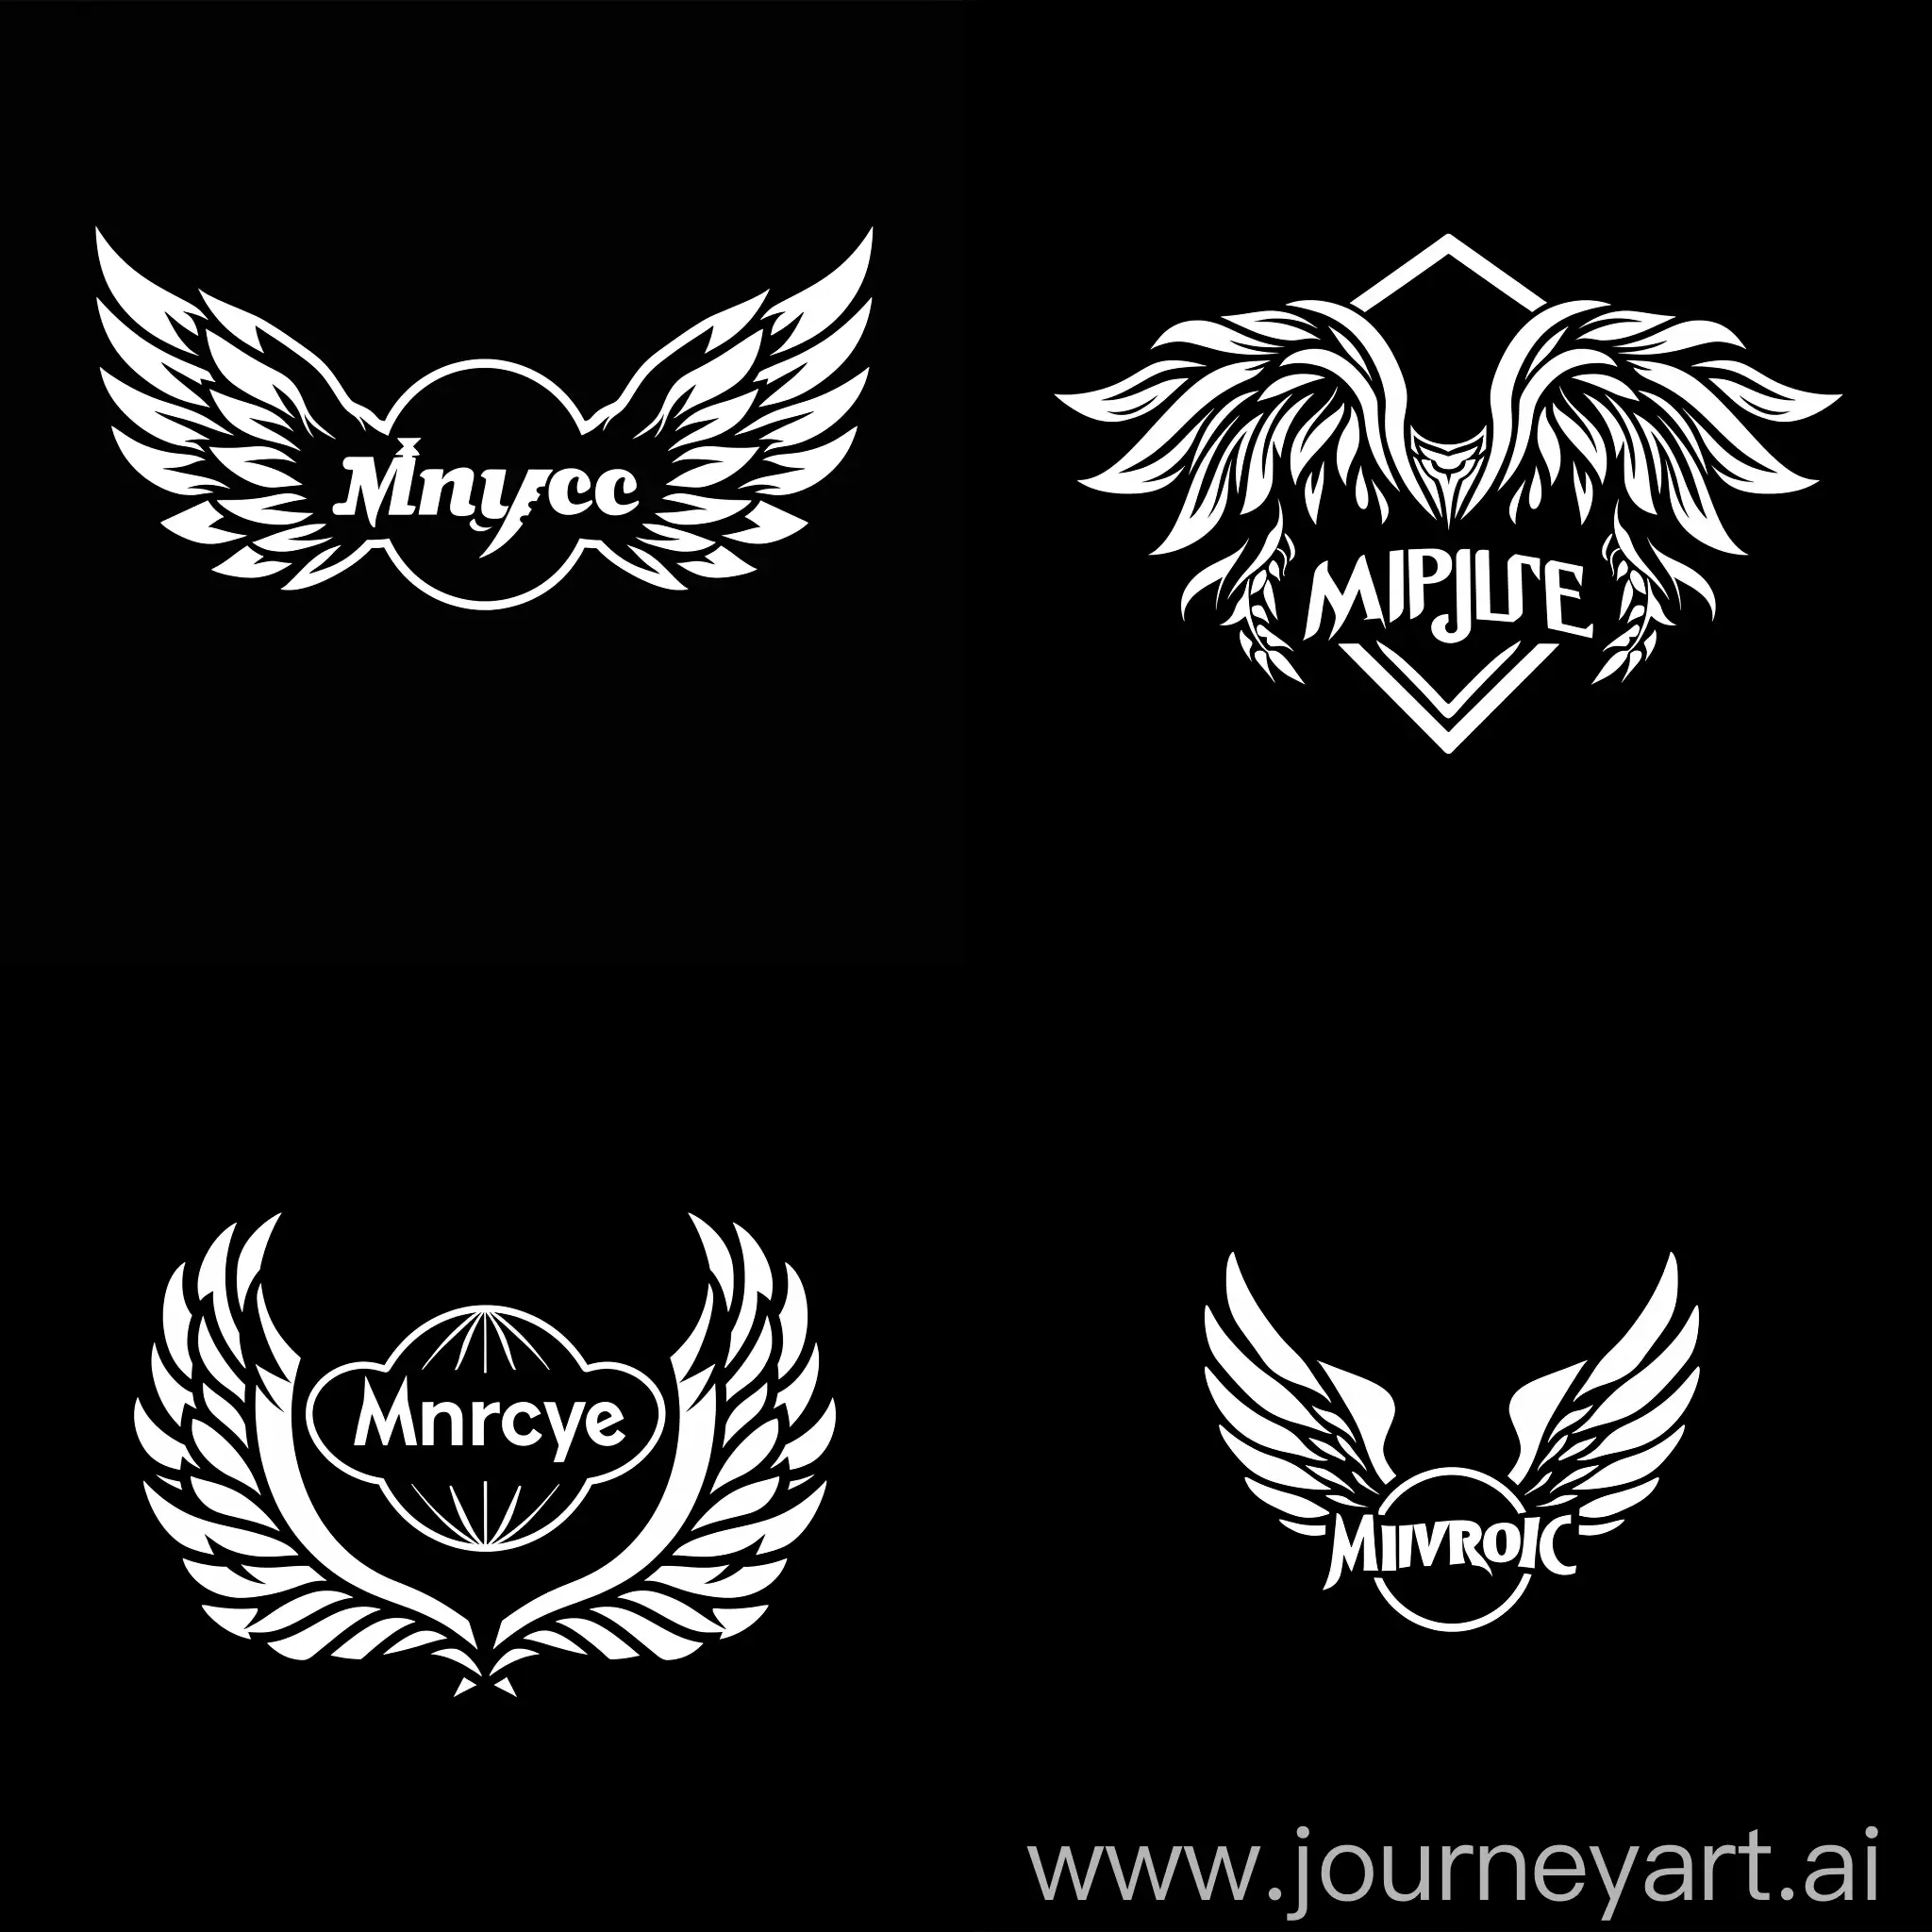 Miracle-Team-Logo-in-Black-and-White